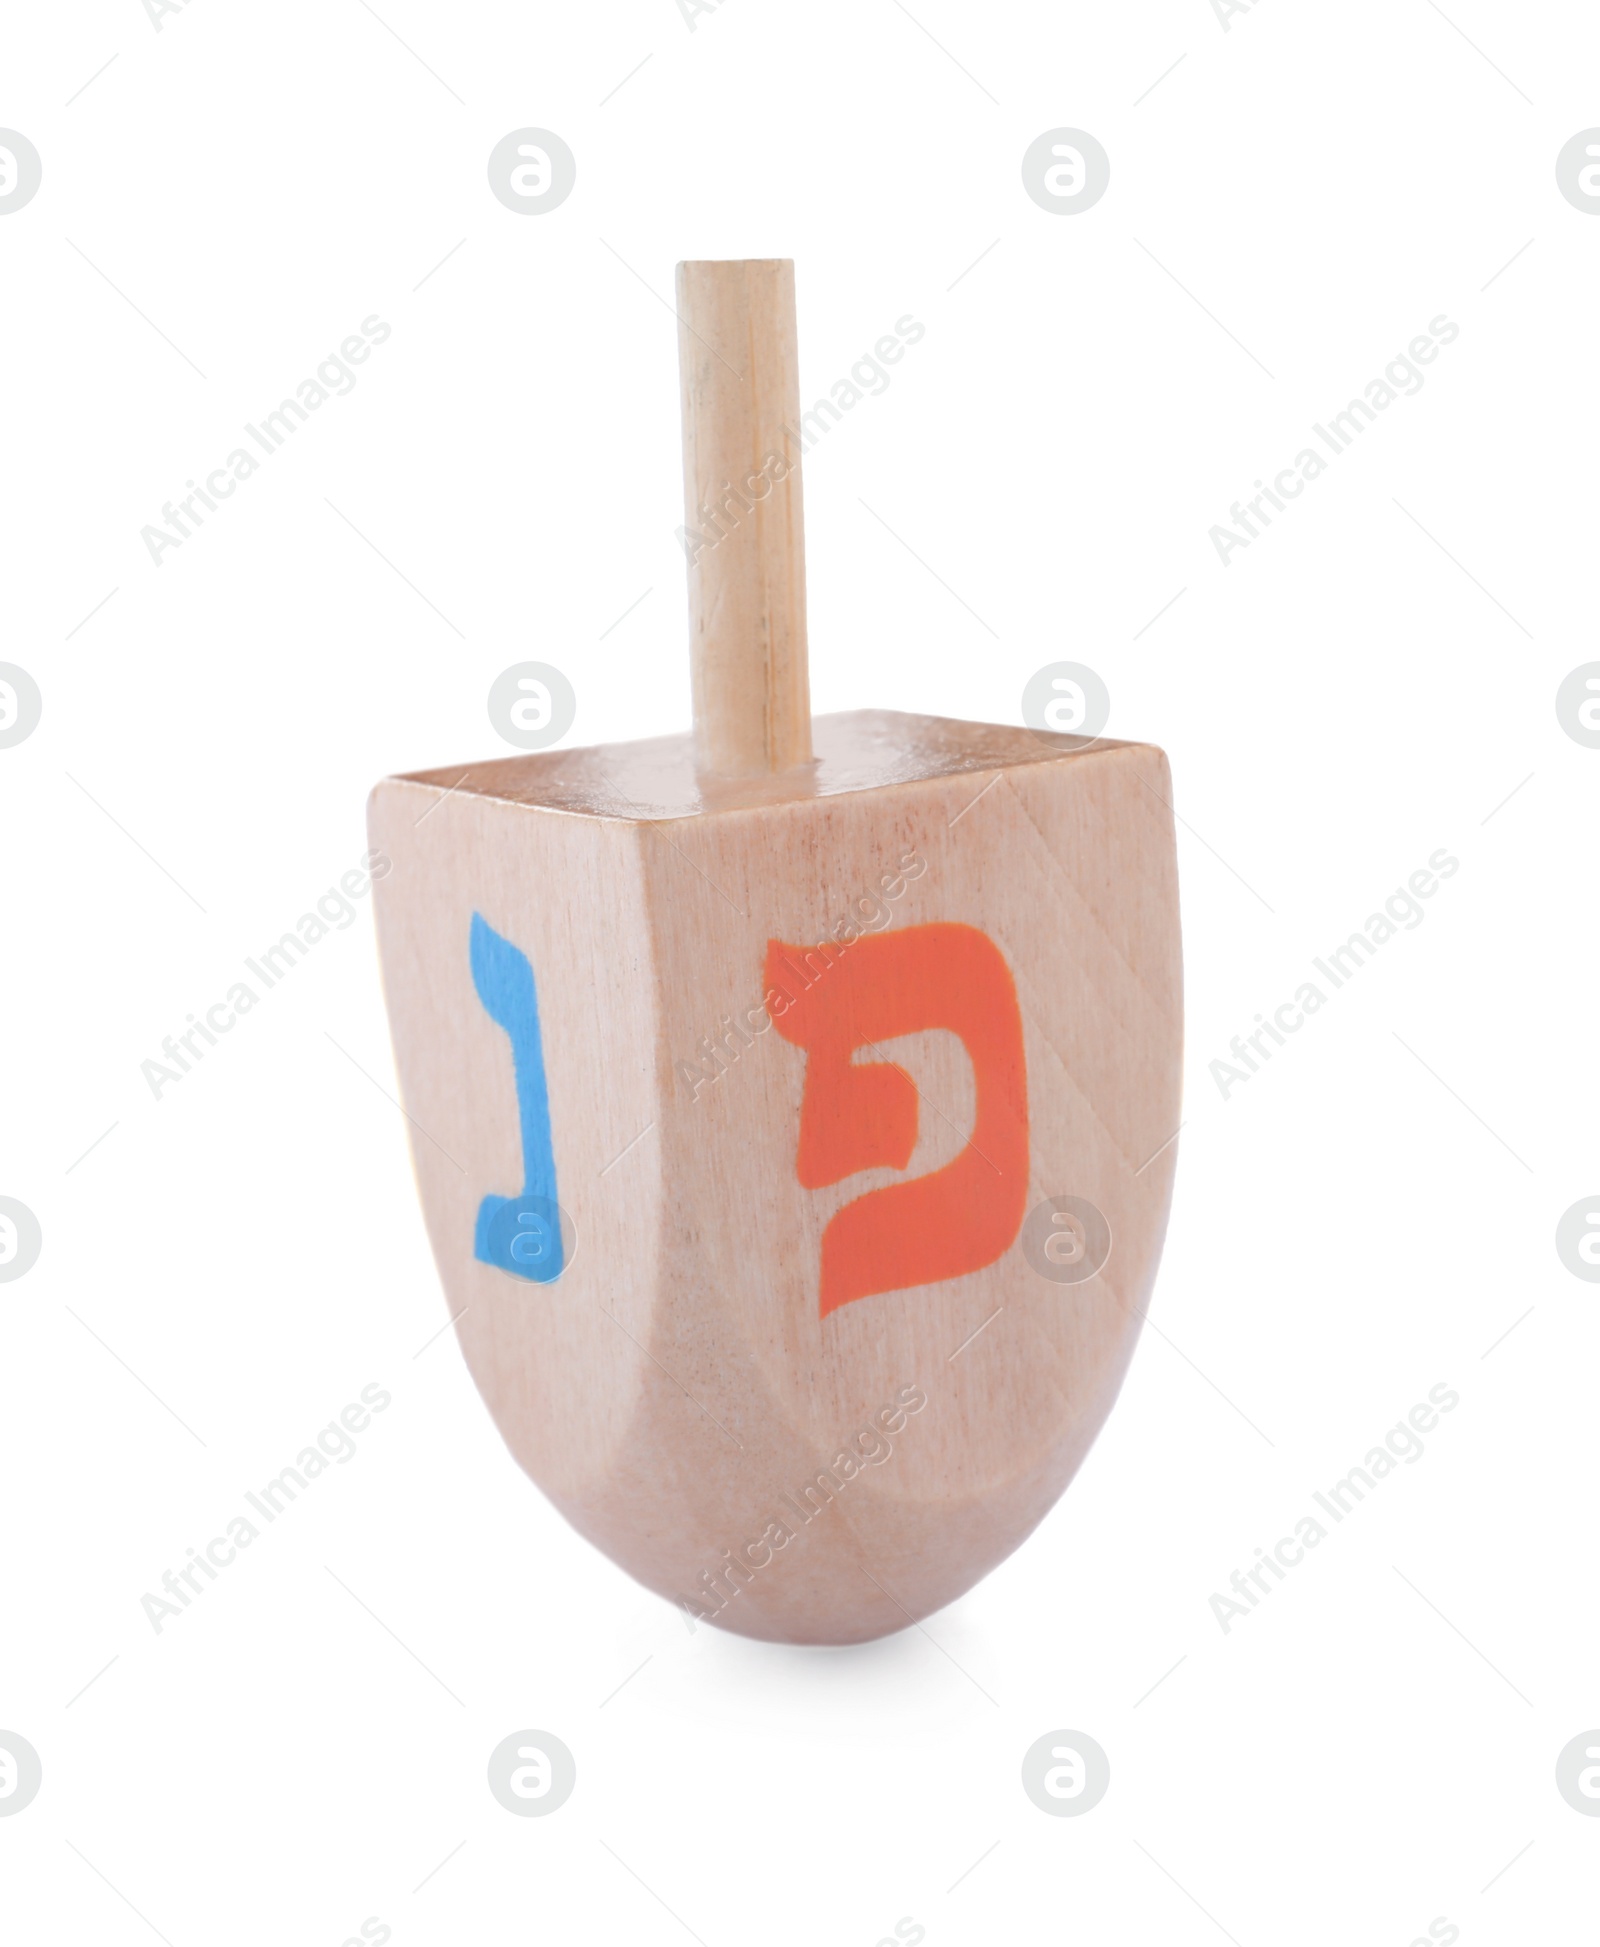 Photo of Wooden Hanukkah traditional dreidel with letters Nun and Pe isolated on white